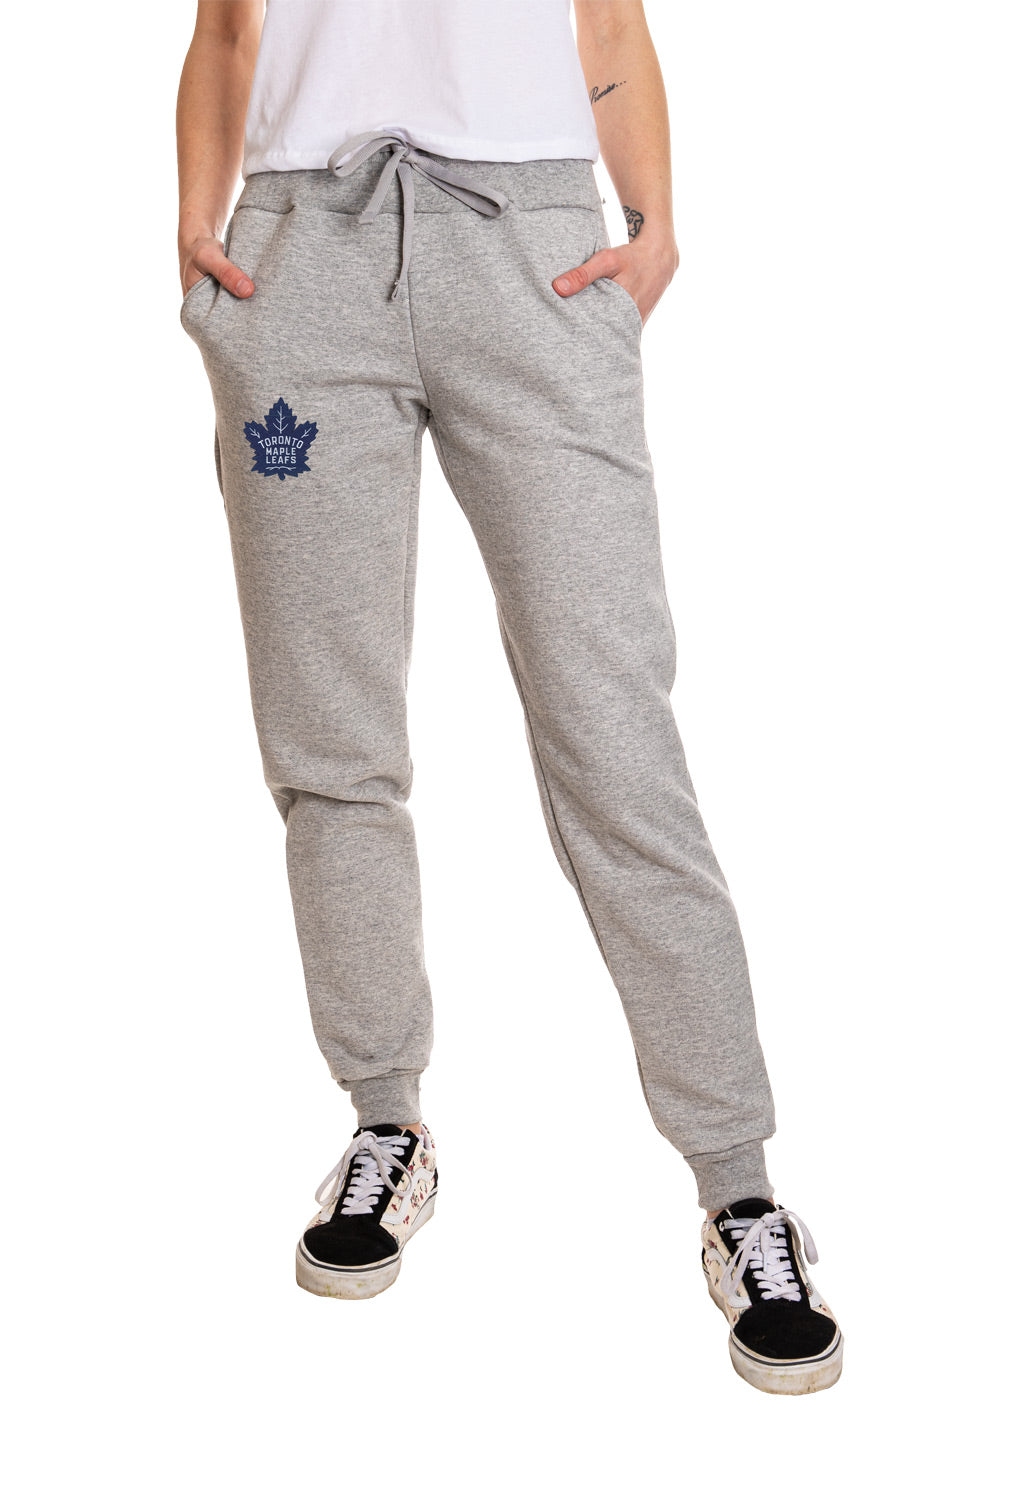 NHL licensed Toronto Maple Leafs Women's oxford cuffed joggers